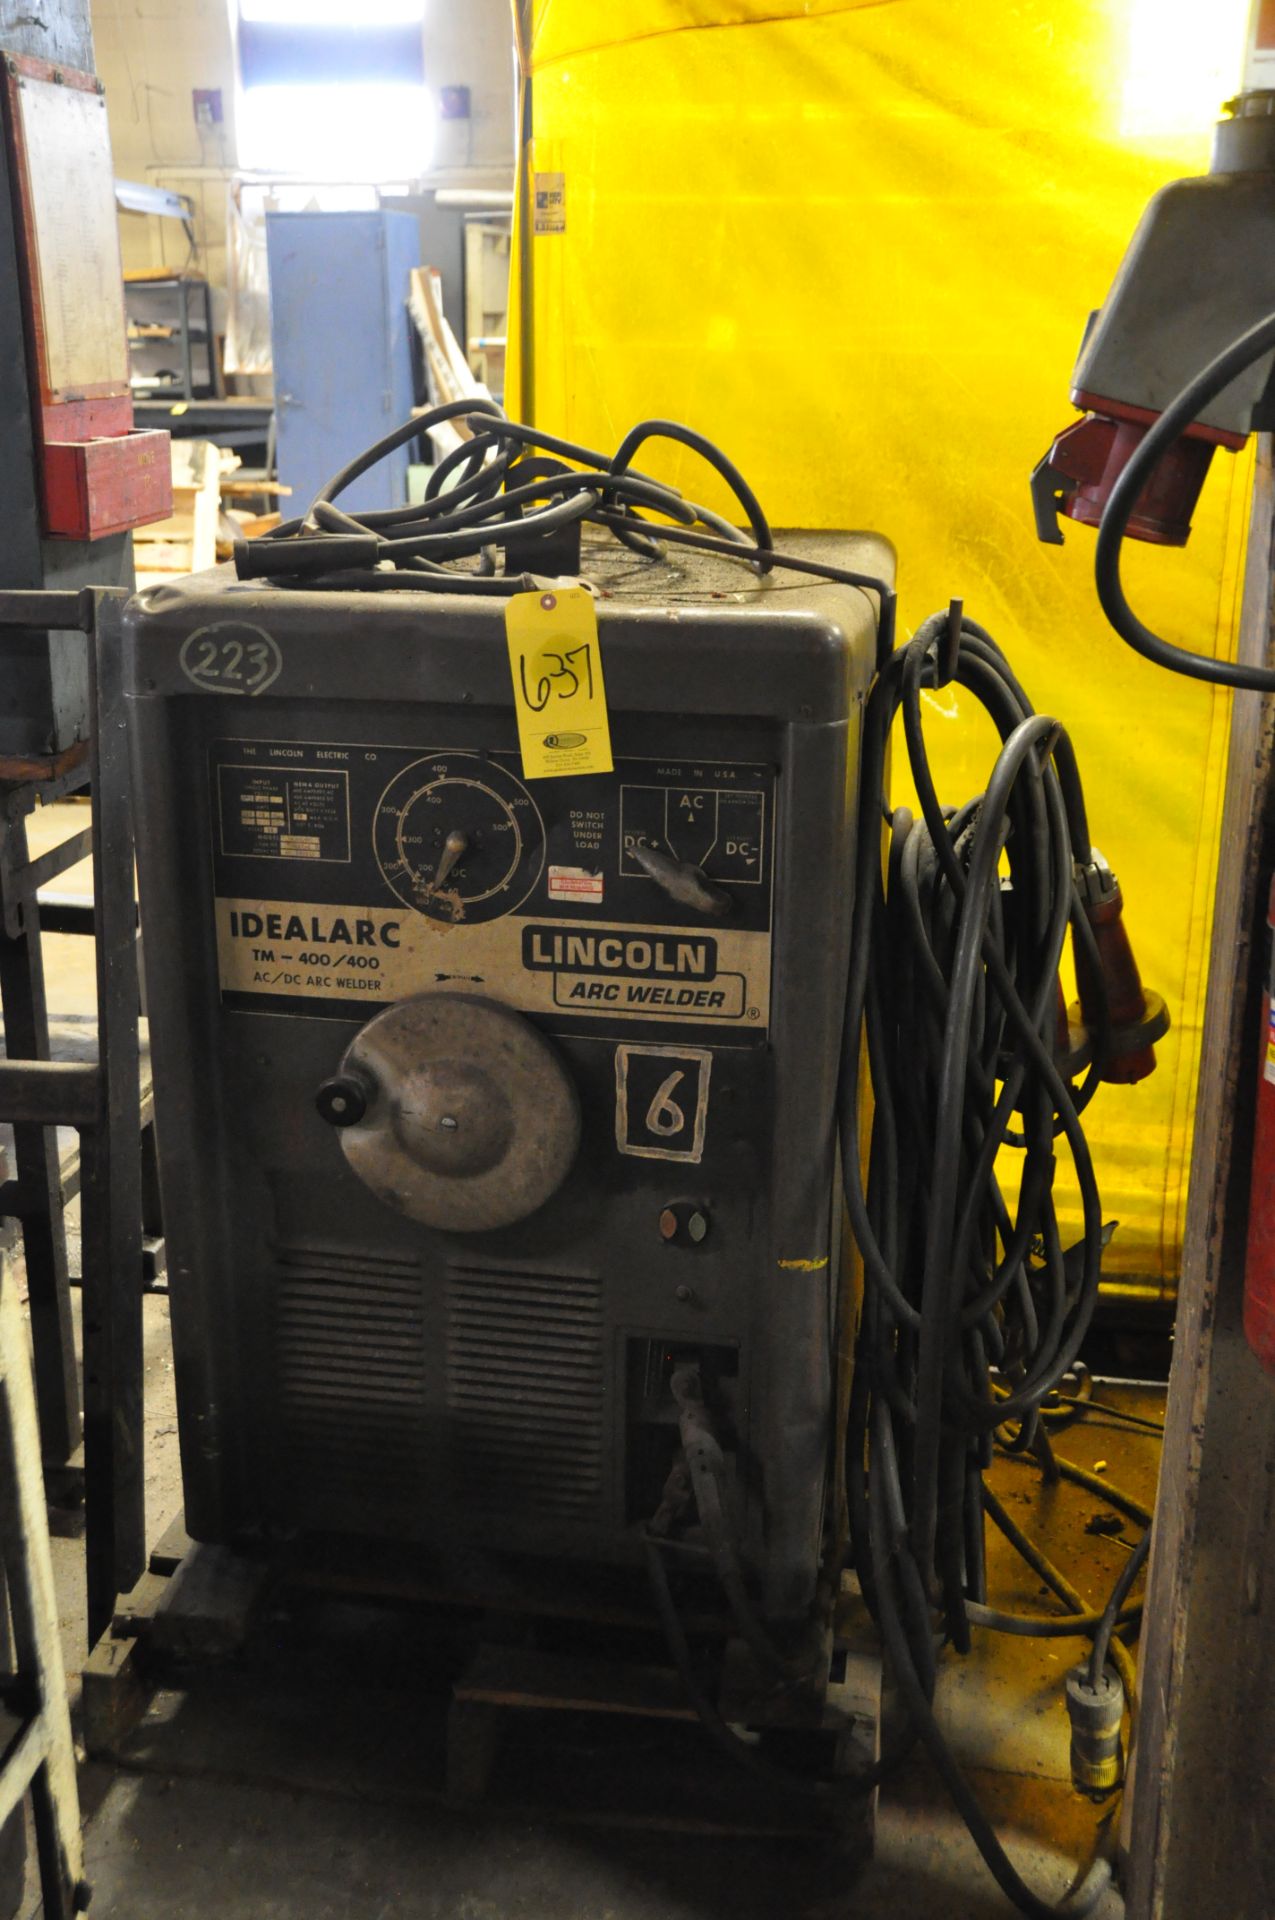 LINCOLN IDEAL ARC WELDER, TM400/450, SN. AC365916 WITH CABLES.